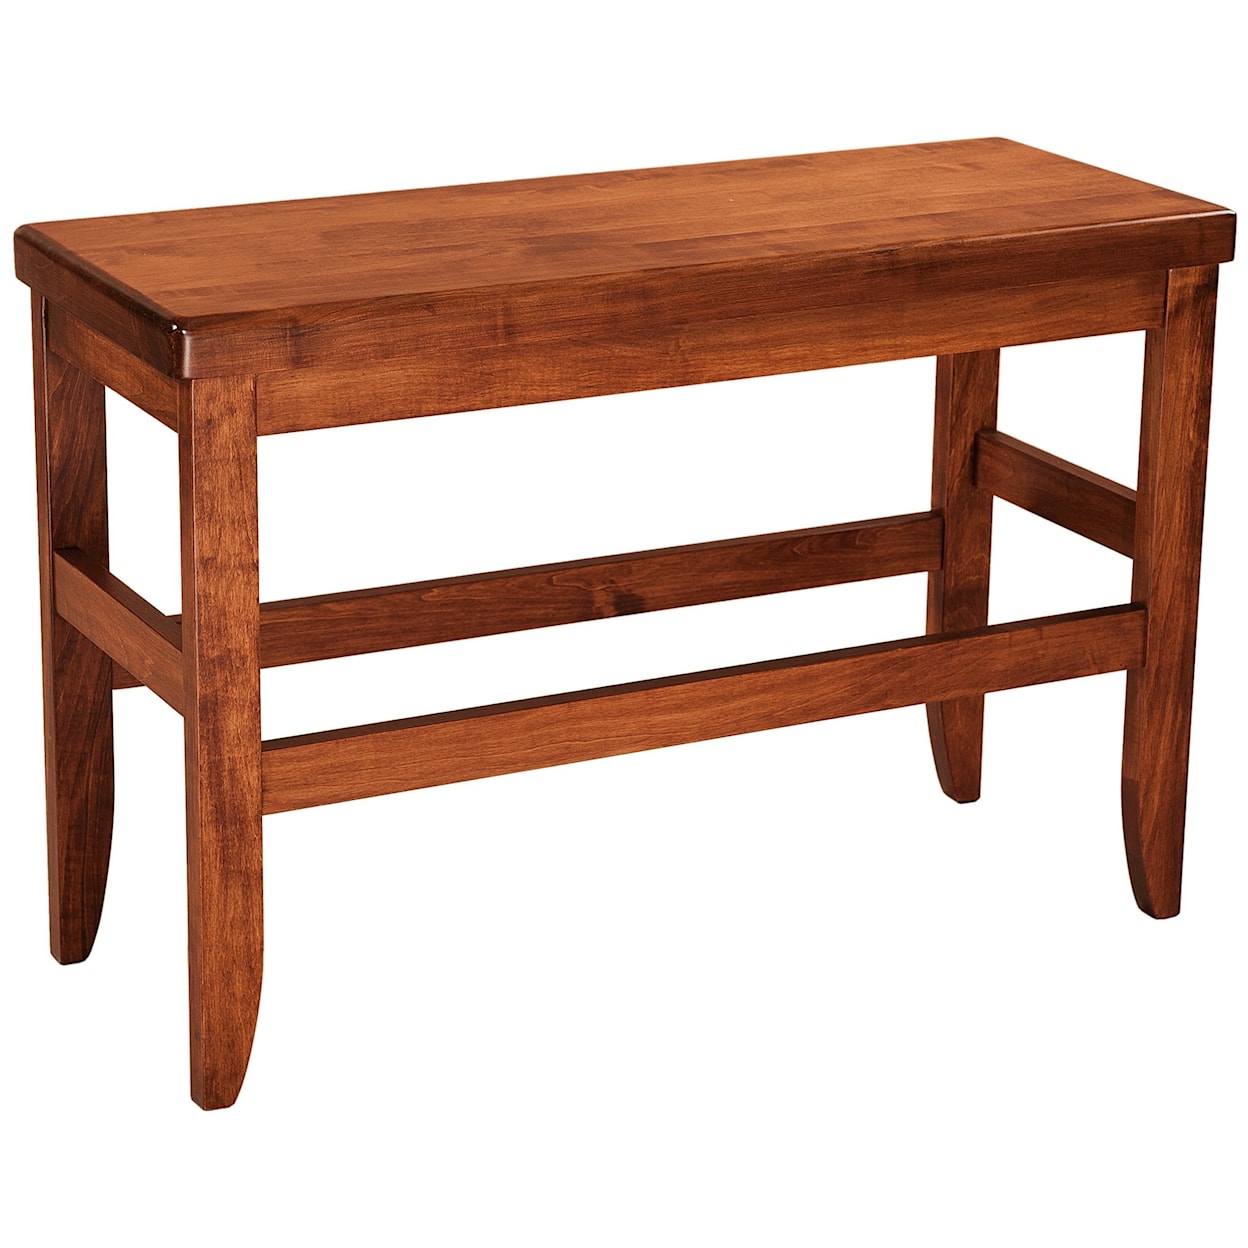 F&N Woodworking Clifton Bench 24"h x 72"w - Wood Seat